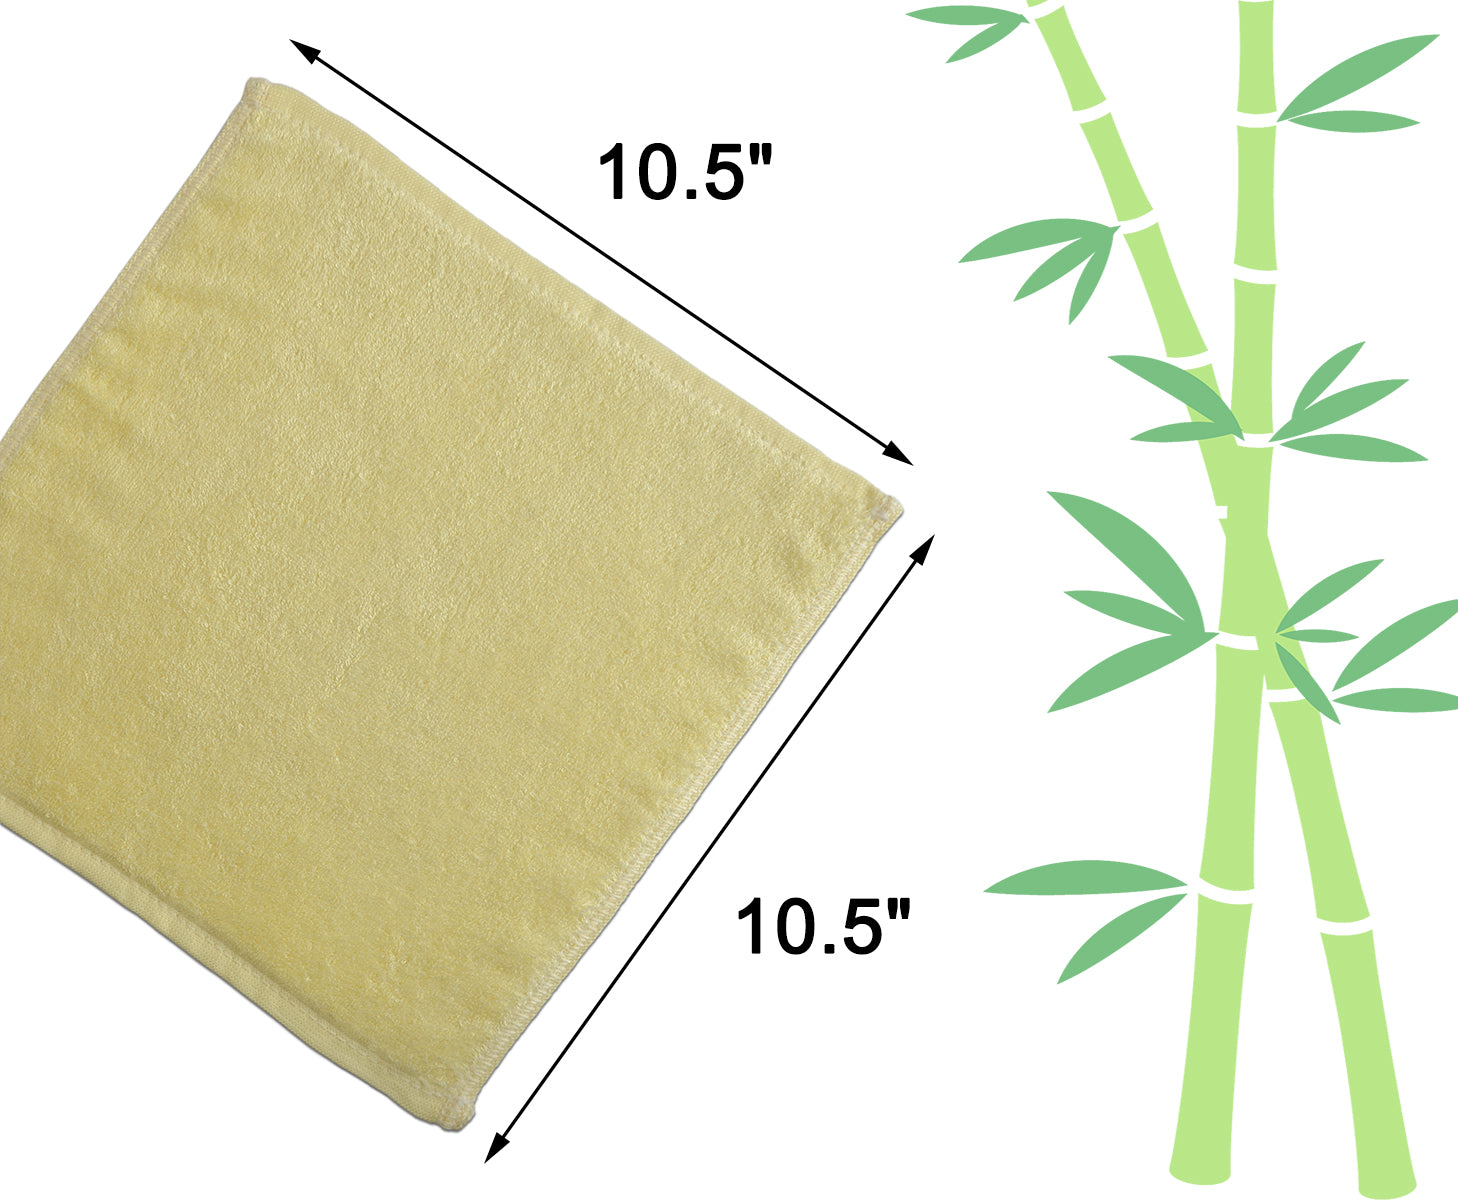 Bamboo Washcloths for Baby & Adults with Sensitive Skins 3 Colors